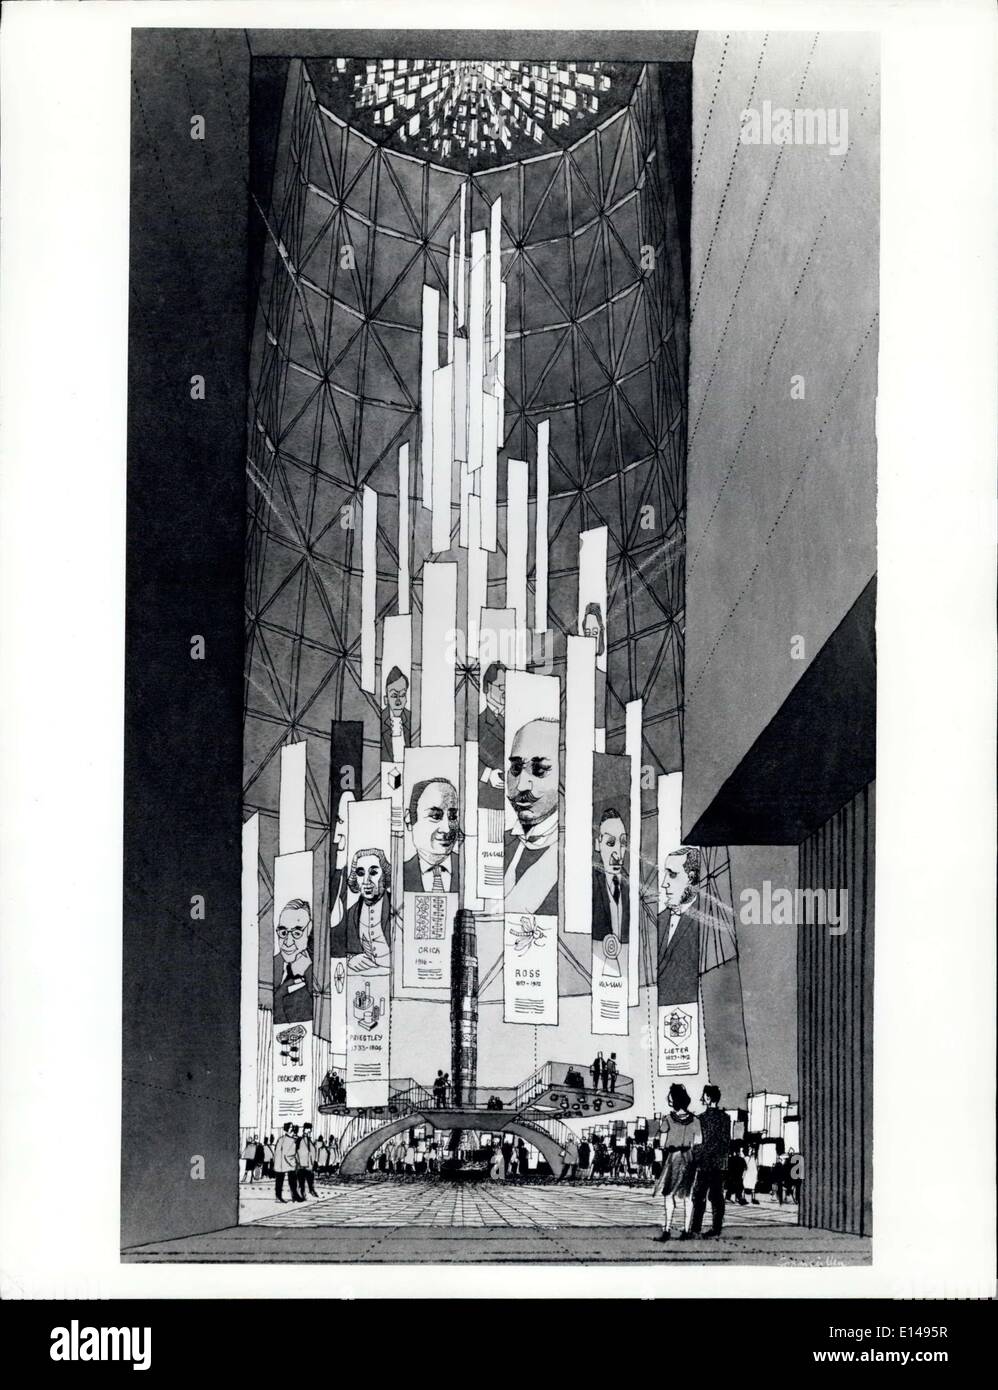 Apr. 17, 2012 - Britain At Expo '67 An artist's impression of the interior of Britain's 200 feet tower at Expo '67. Beverley Pick illustrates some of Britain's outstanding contributions to human progress in his section ''The Genius of Britain' Stock Photo